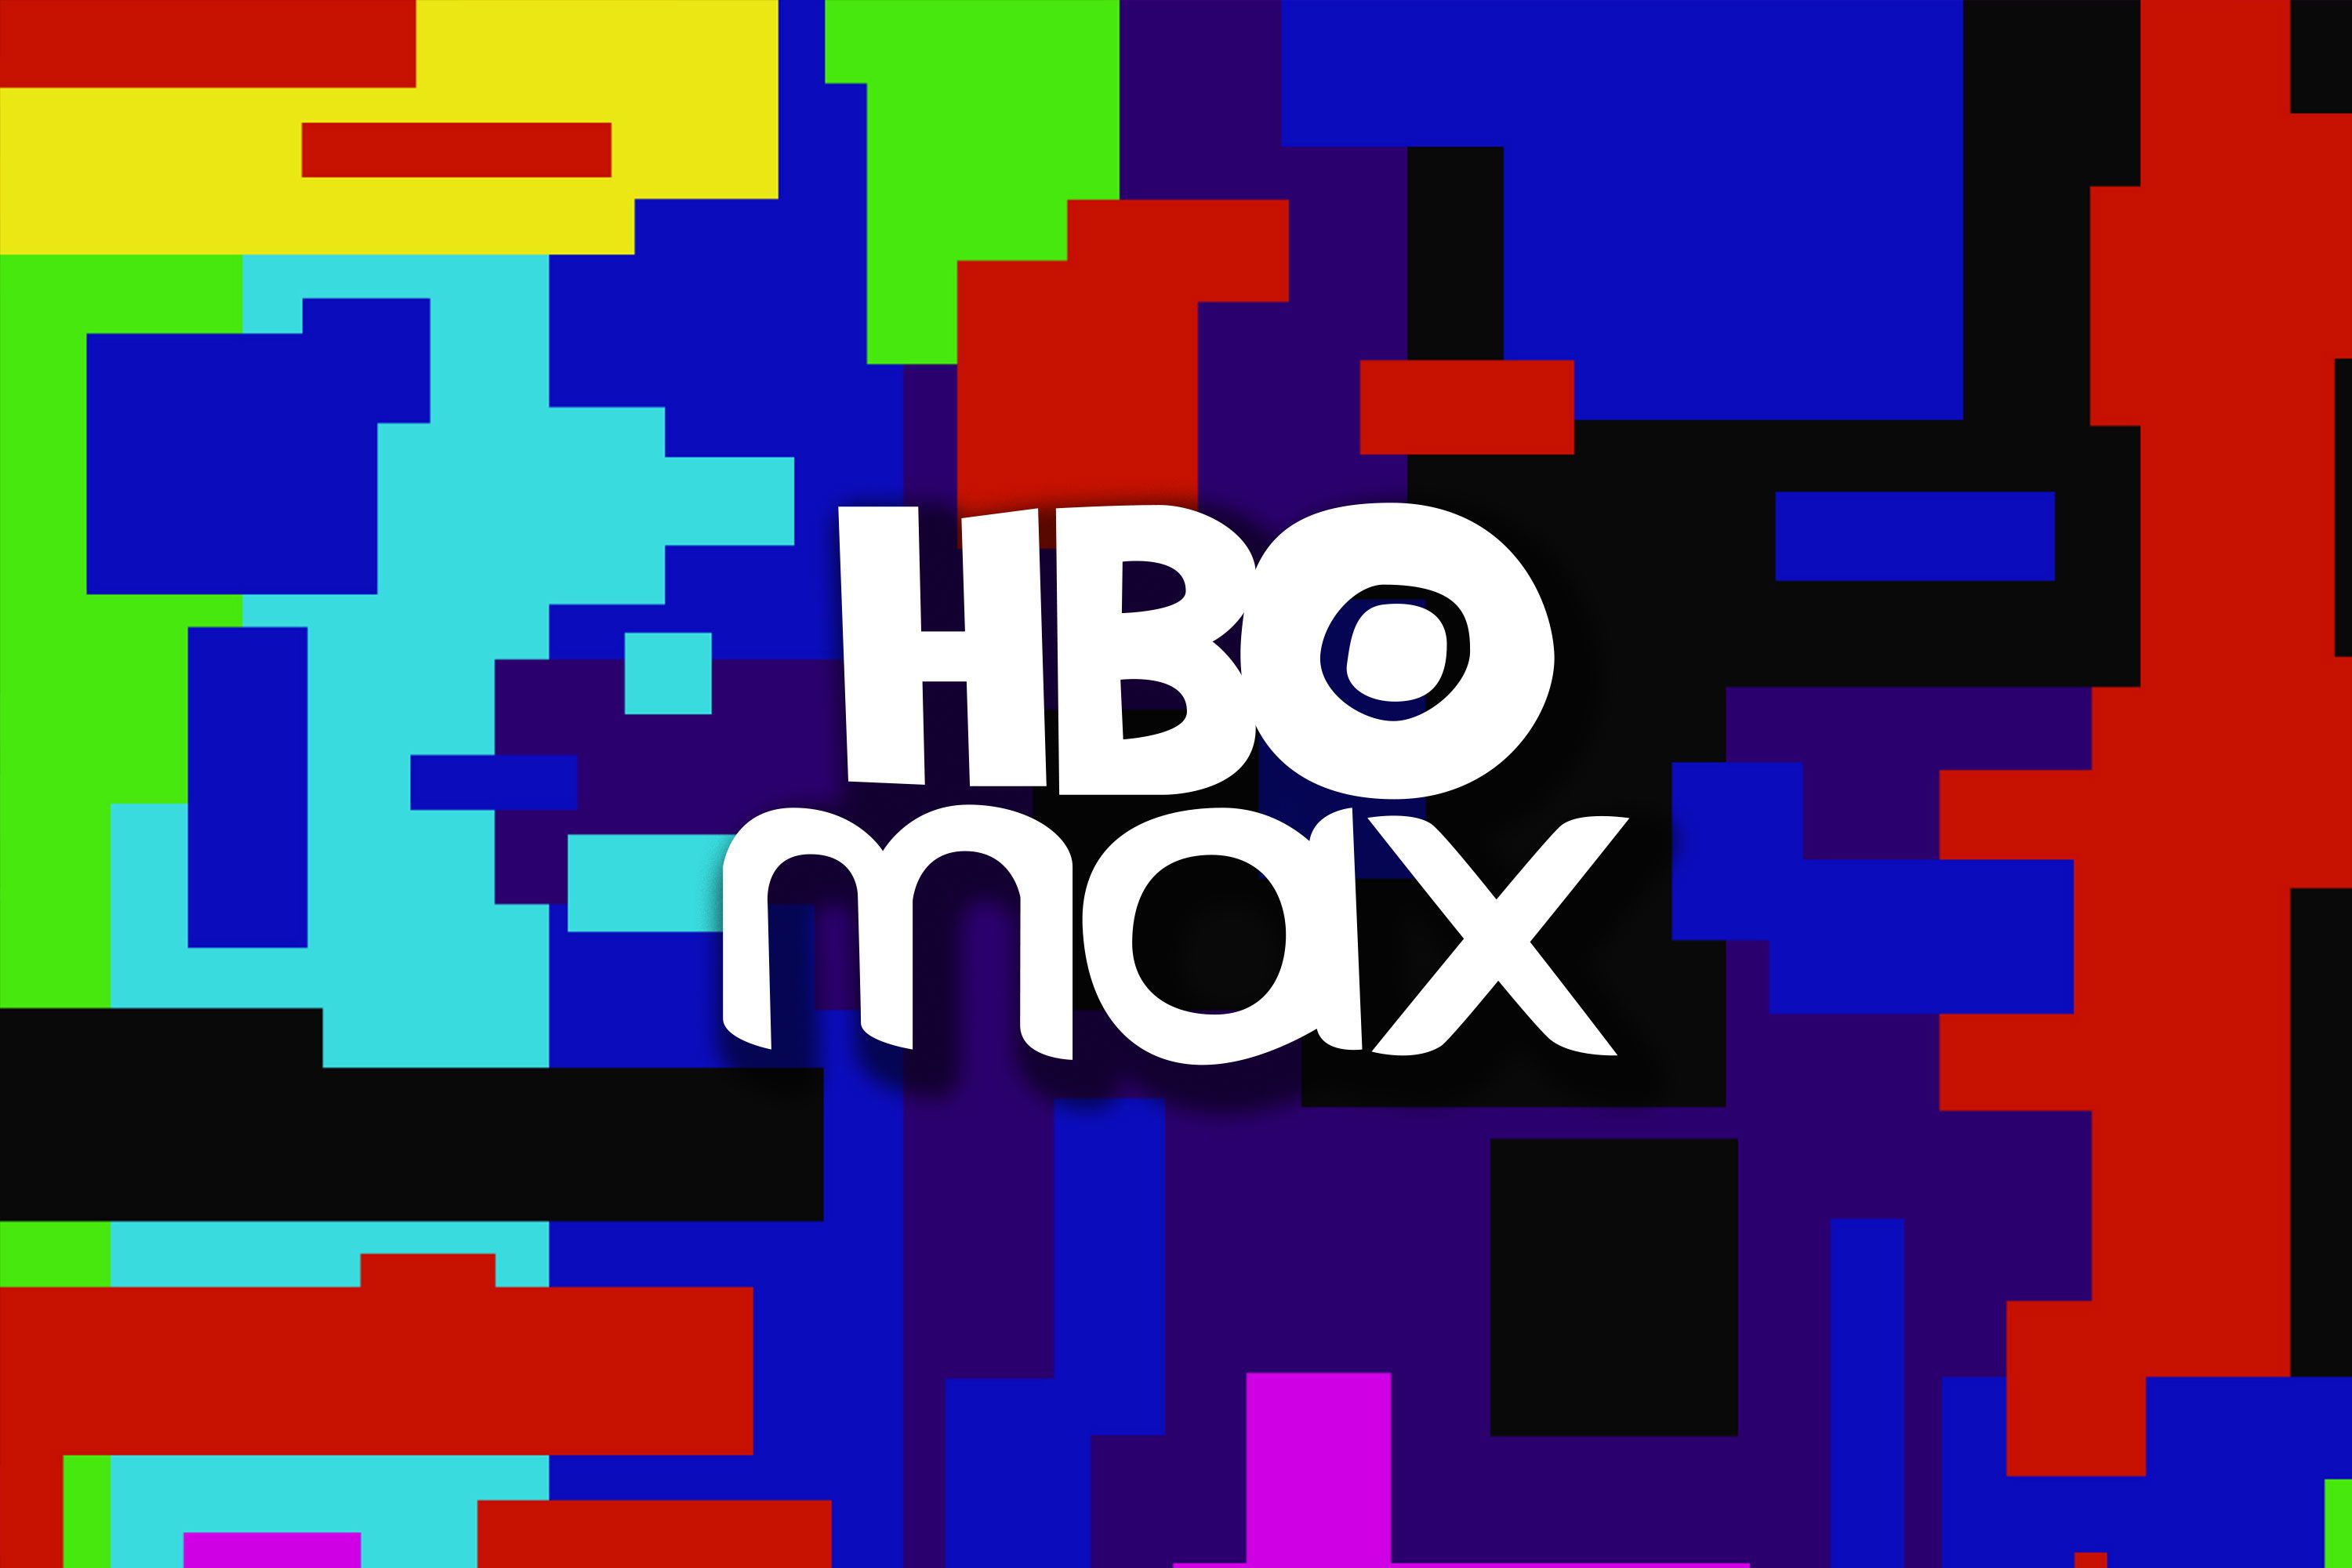 HBO Max Promo Code & Coupon December 2023